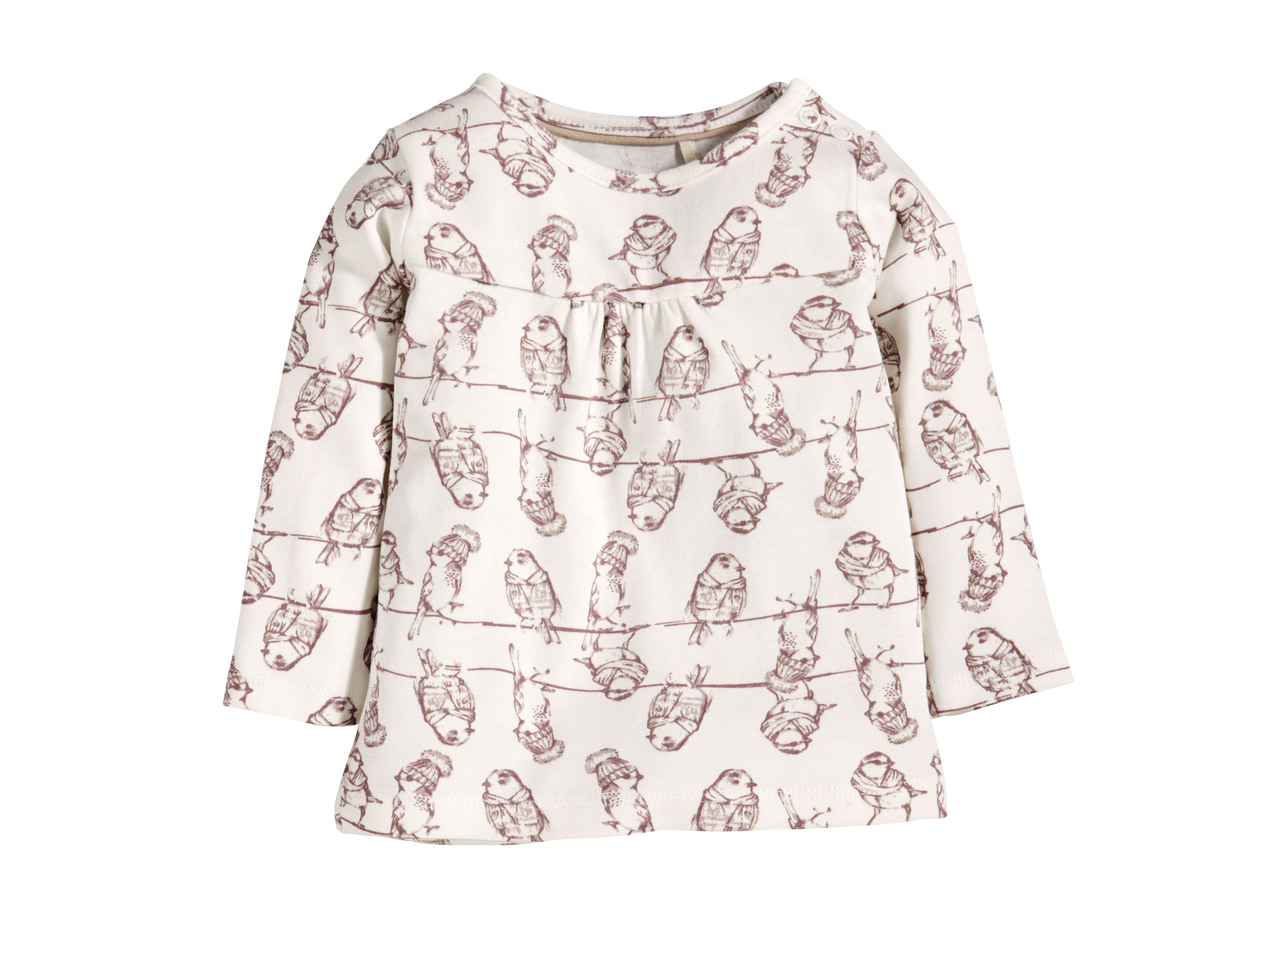 Long-Sleeved Top for Baby Girls